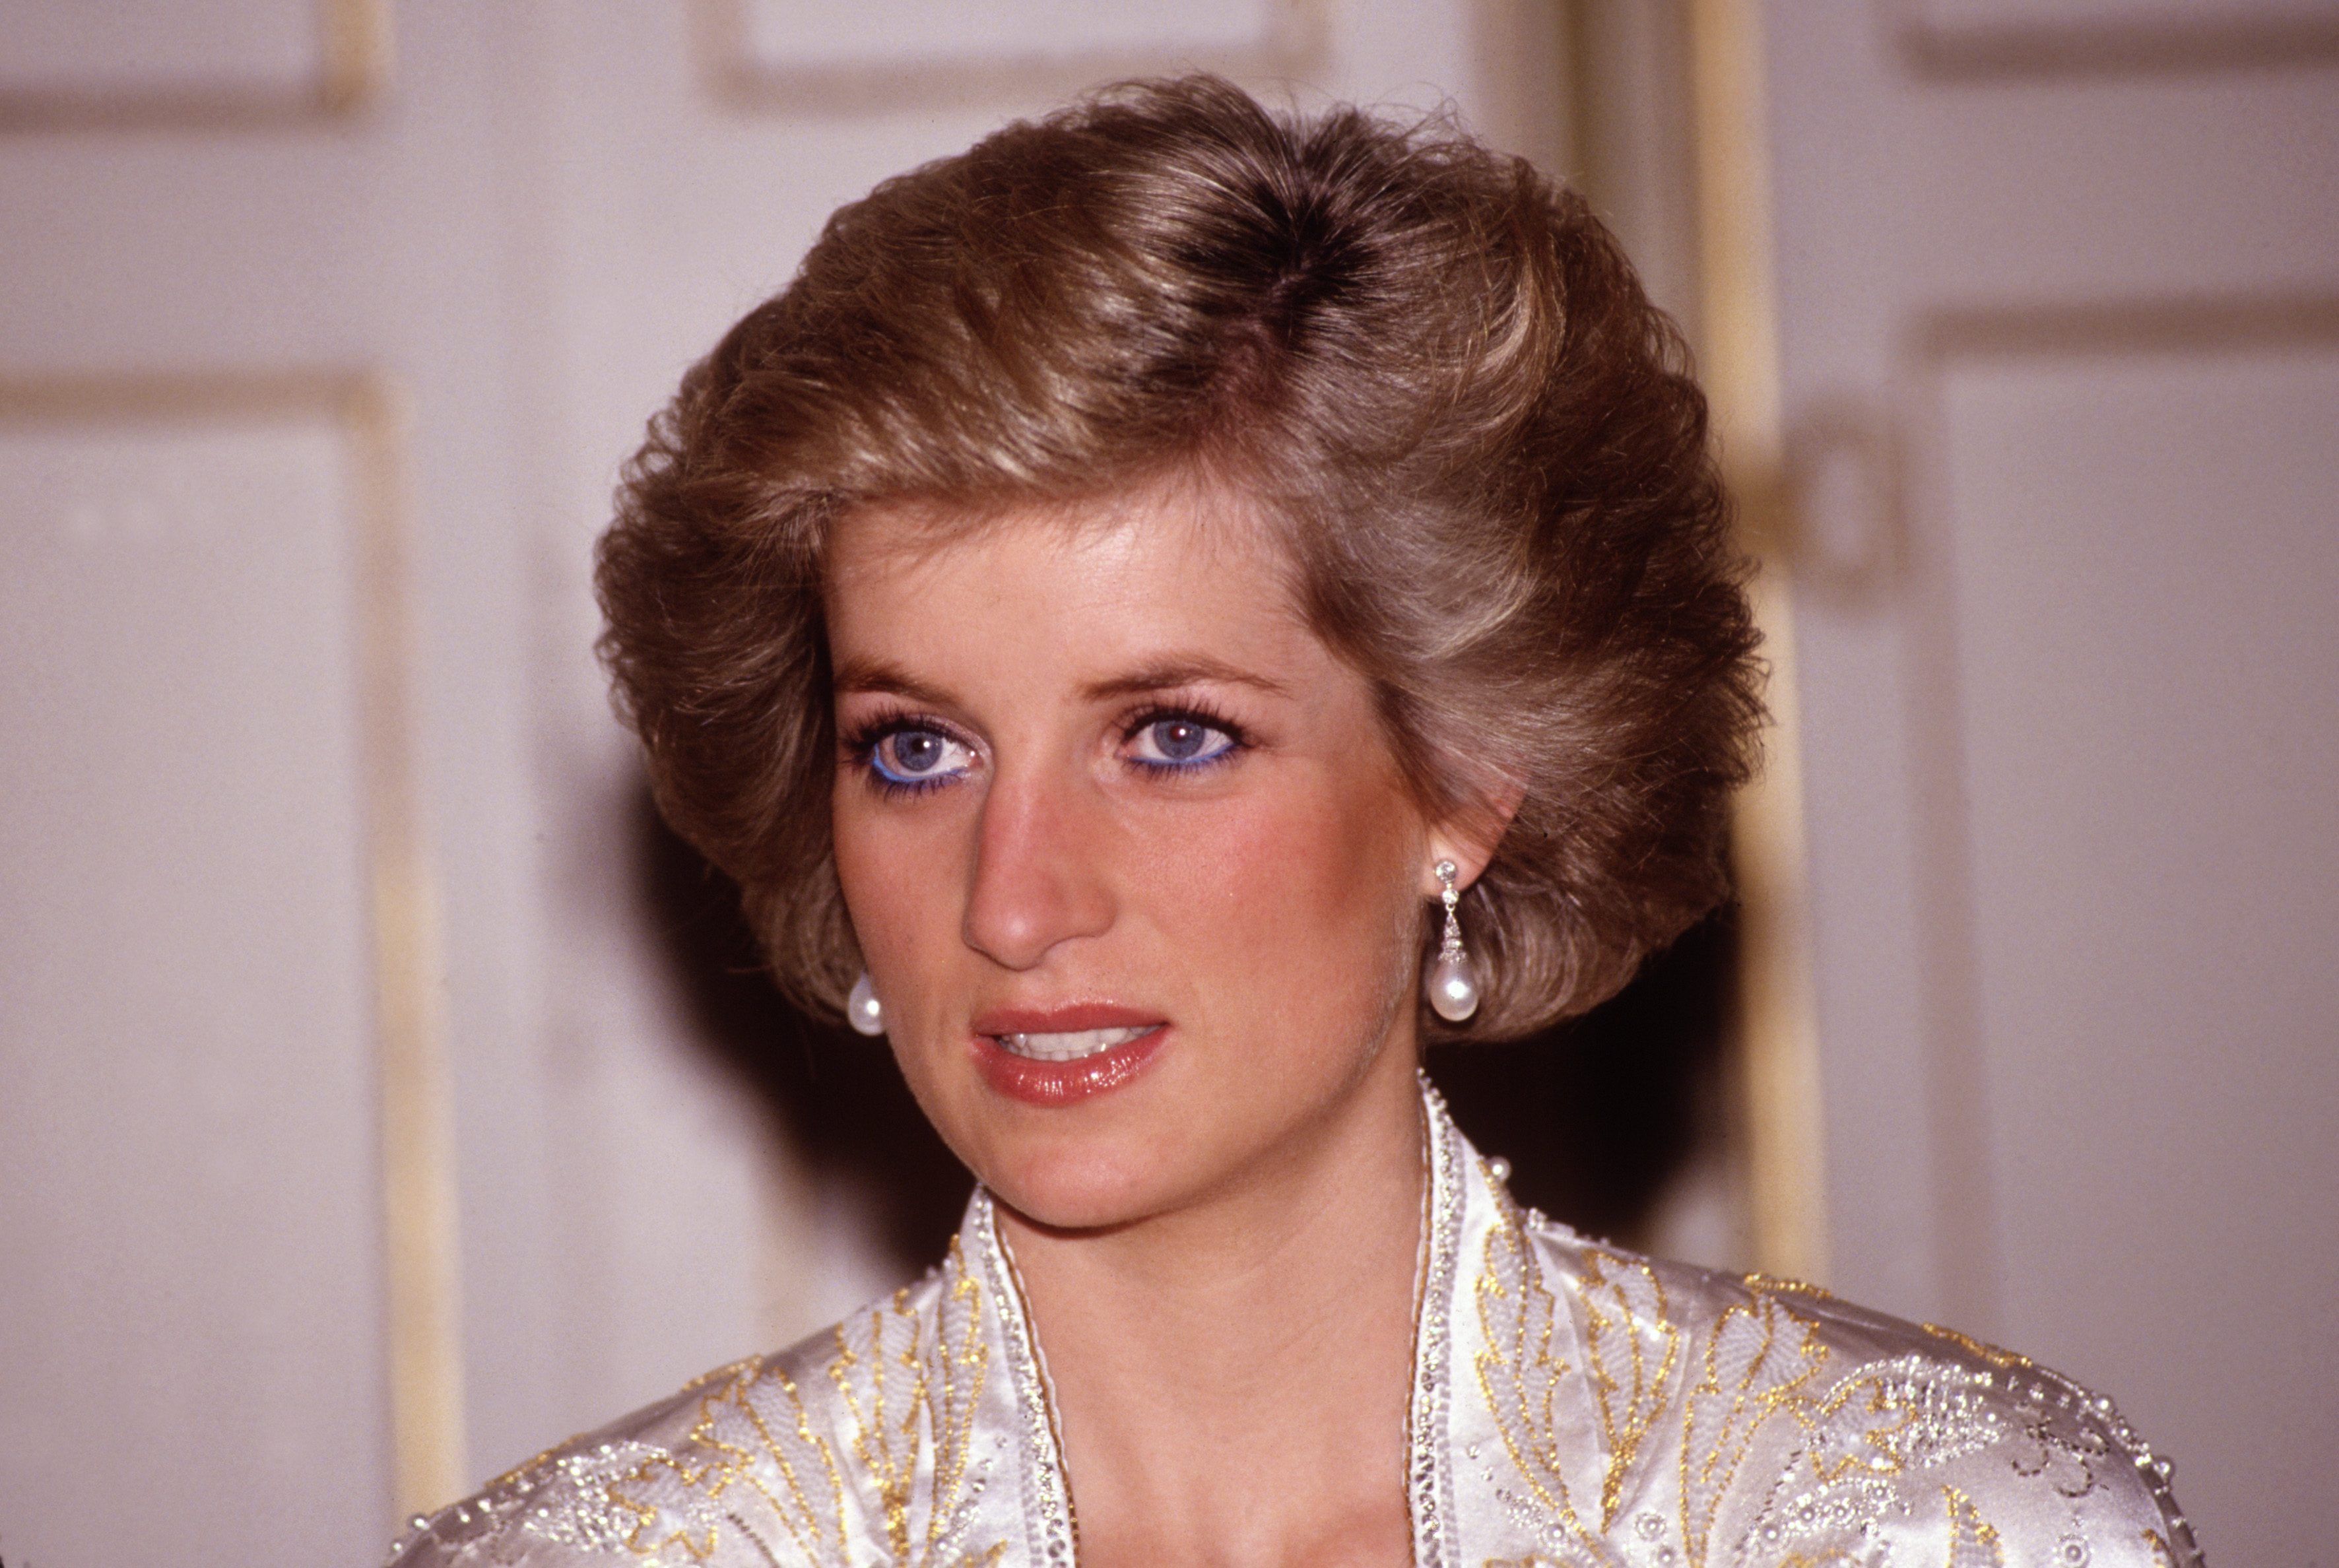 Photo of Princess Diana from the shoulders up wearing pearl-drop earrings and her signature blue eyeliner